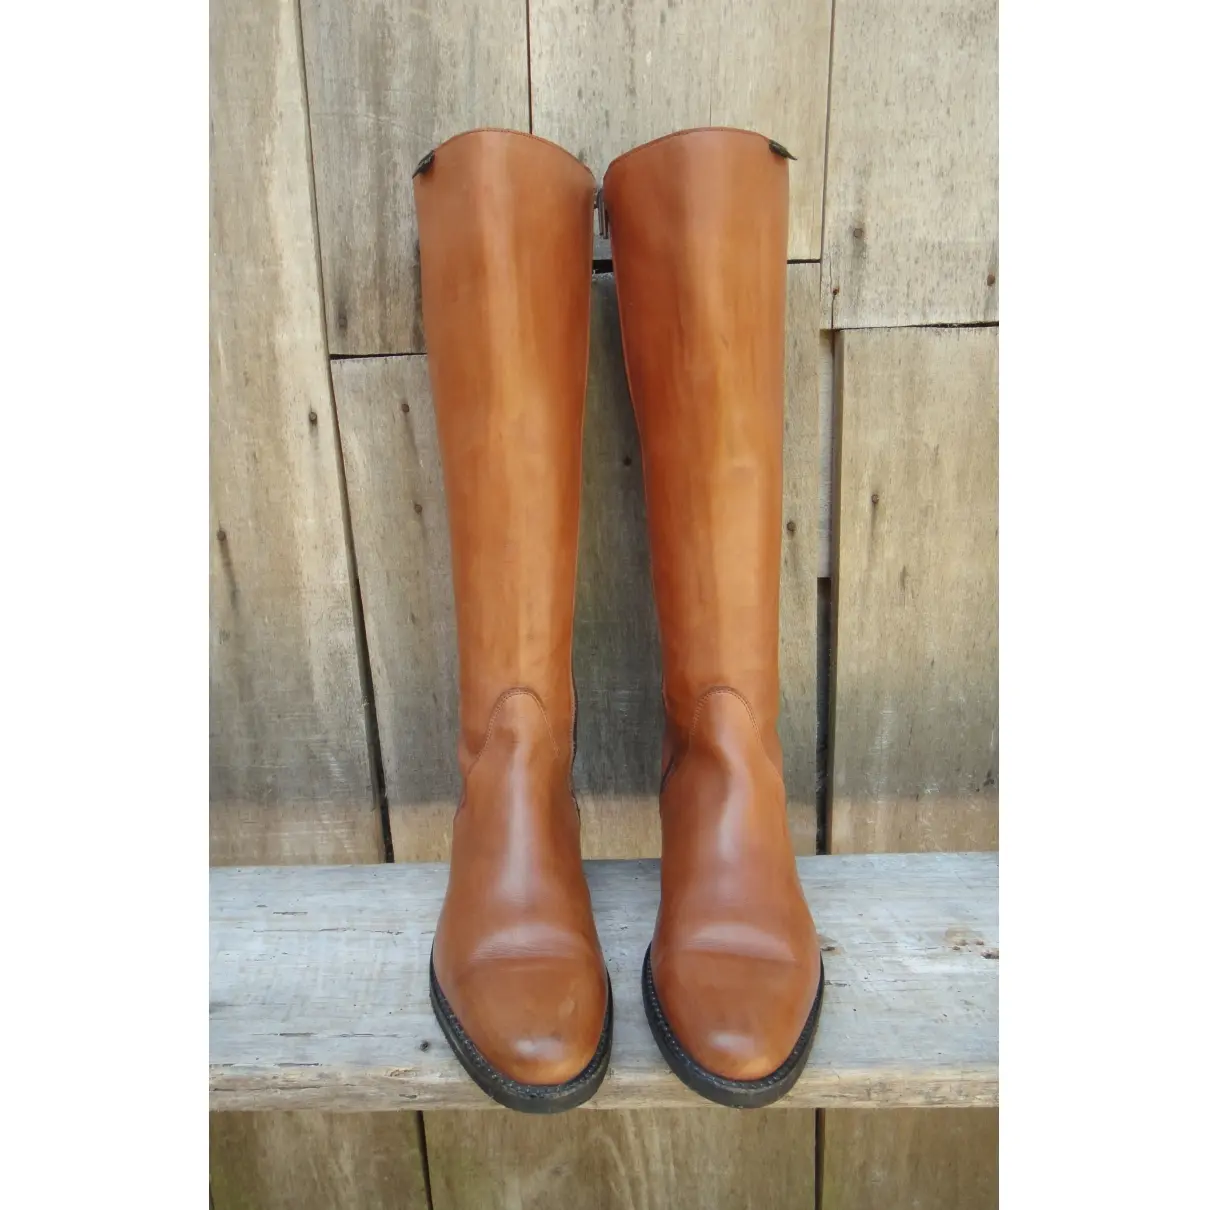 Paraboot Leather riding boots for sale